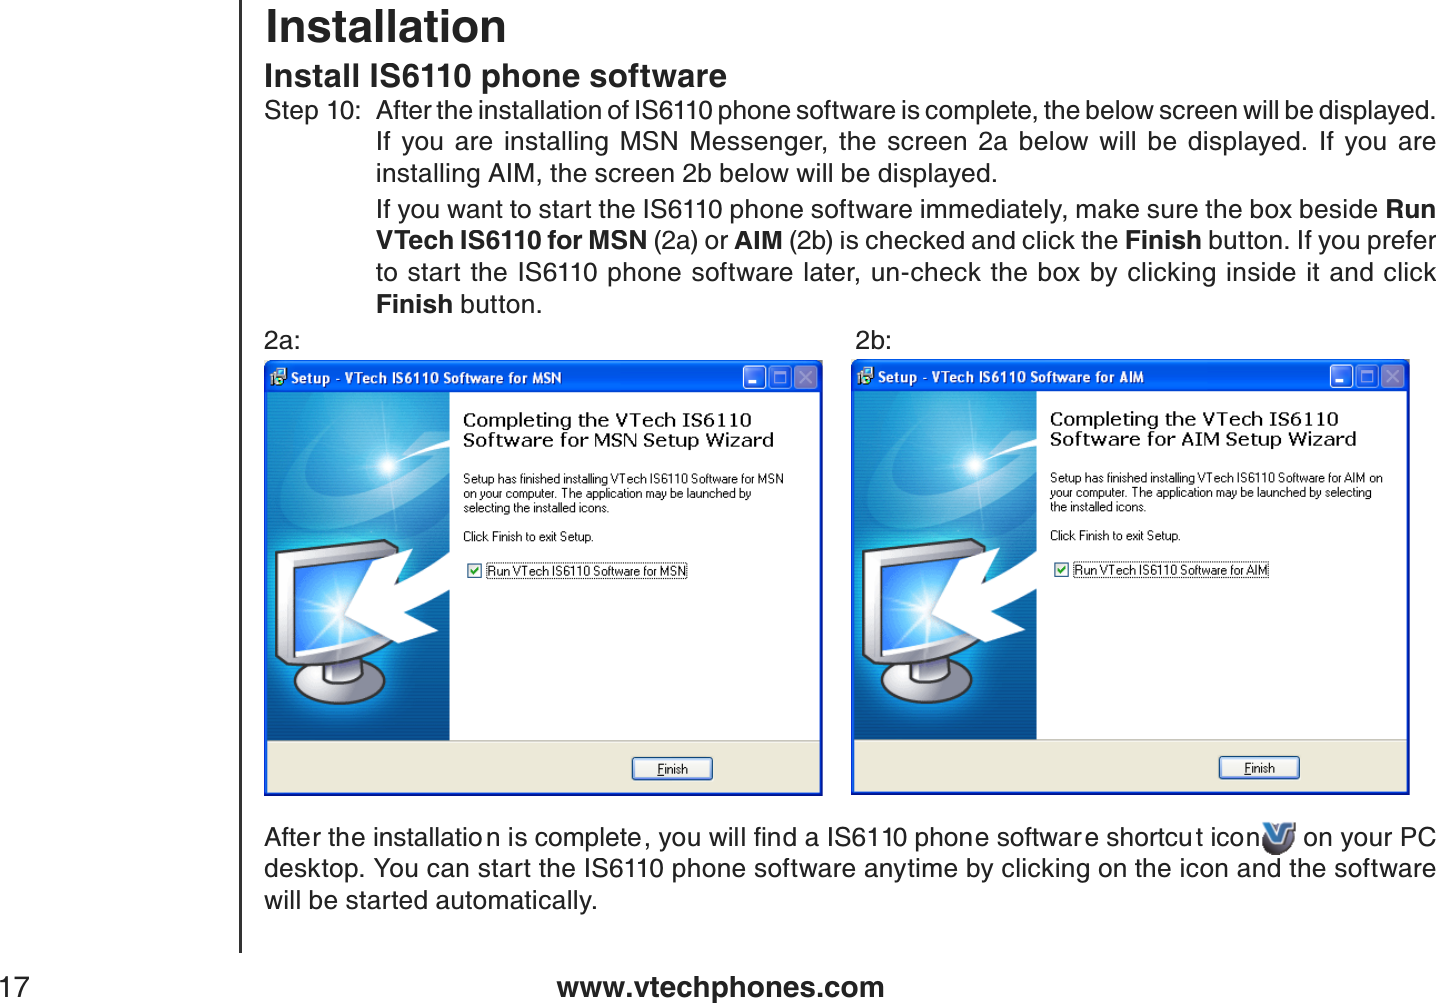 www.vtechphones.com17InstallationInstall IS6110 phone softwareStep 10:After the installation of IS6110 phone software is complete, the below screen will be displayed. If  you  are  installing  MSN  Messenger,  the  screen  2a  below  will  be  displayed.  If  you  are installing AIM, the screen 2b below will be displayed.    If you want to start the IS6110 phone software immediately, make sure the box beside Run V Tech IS6110 for MSN (2a) or AIM (2b)is checked and click the Finish button. If you prefer to start the IS6110 phone software later, un-check the box by clicking inside it and click Finish button.2a:           2b:#HVGTVJGKPUVCNNCVKQ PKUEQORNGVG[QWYKNNſPFC+5RJQPGUQHVYCT GUJQTVEW VKEQP on your PC desktop. You can start the IS6110 phone software anytime by clicking on the icon and the software will be started automatically.